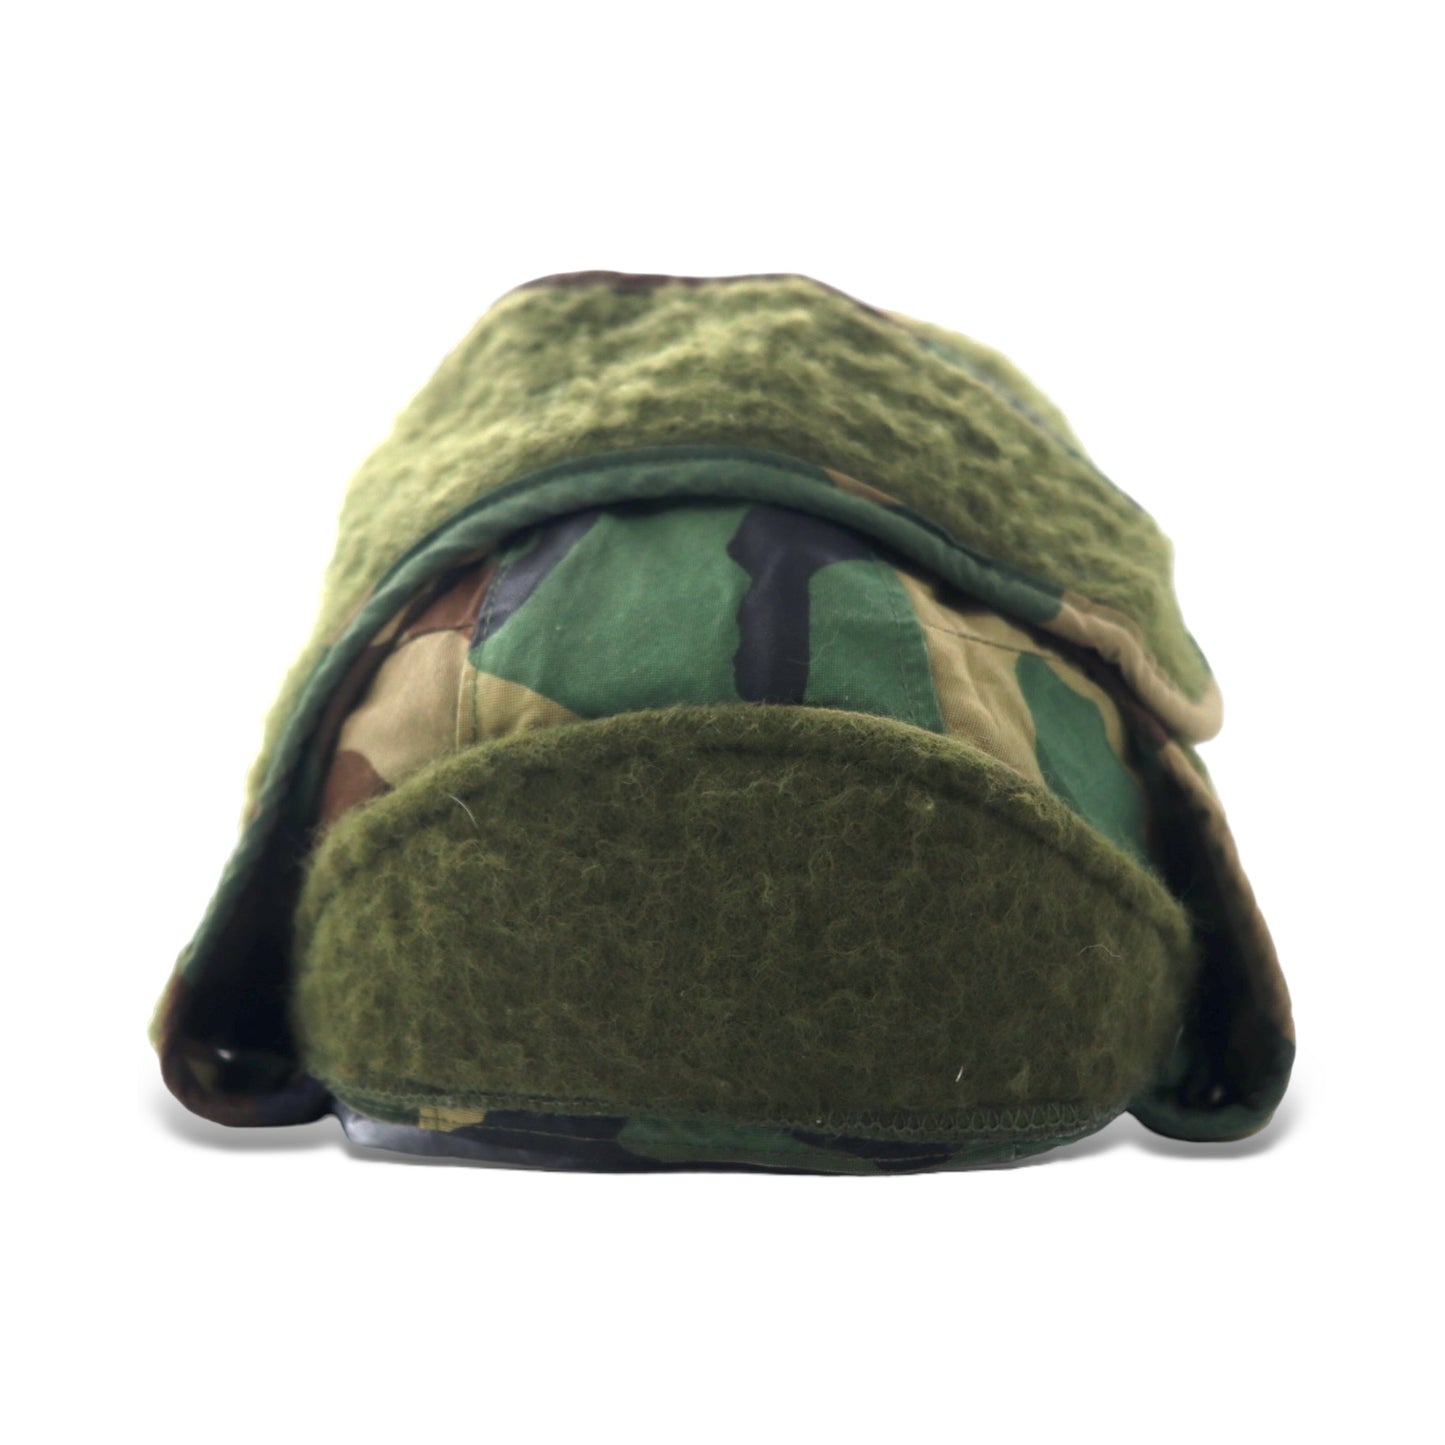 US ARMY 米軍 フライトキャップ ヘルメットライナーキャップ M-65 57.7cm カーキ カモフラ コットン ミリタリー CAP COLD WEATHER INSULATING HELMET LINER WOODLAND CAMOUFLAGE 8415-01-099-7846 PROTECTIVE APPAREL CORP OF AMERICA